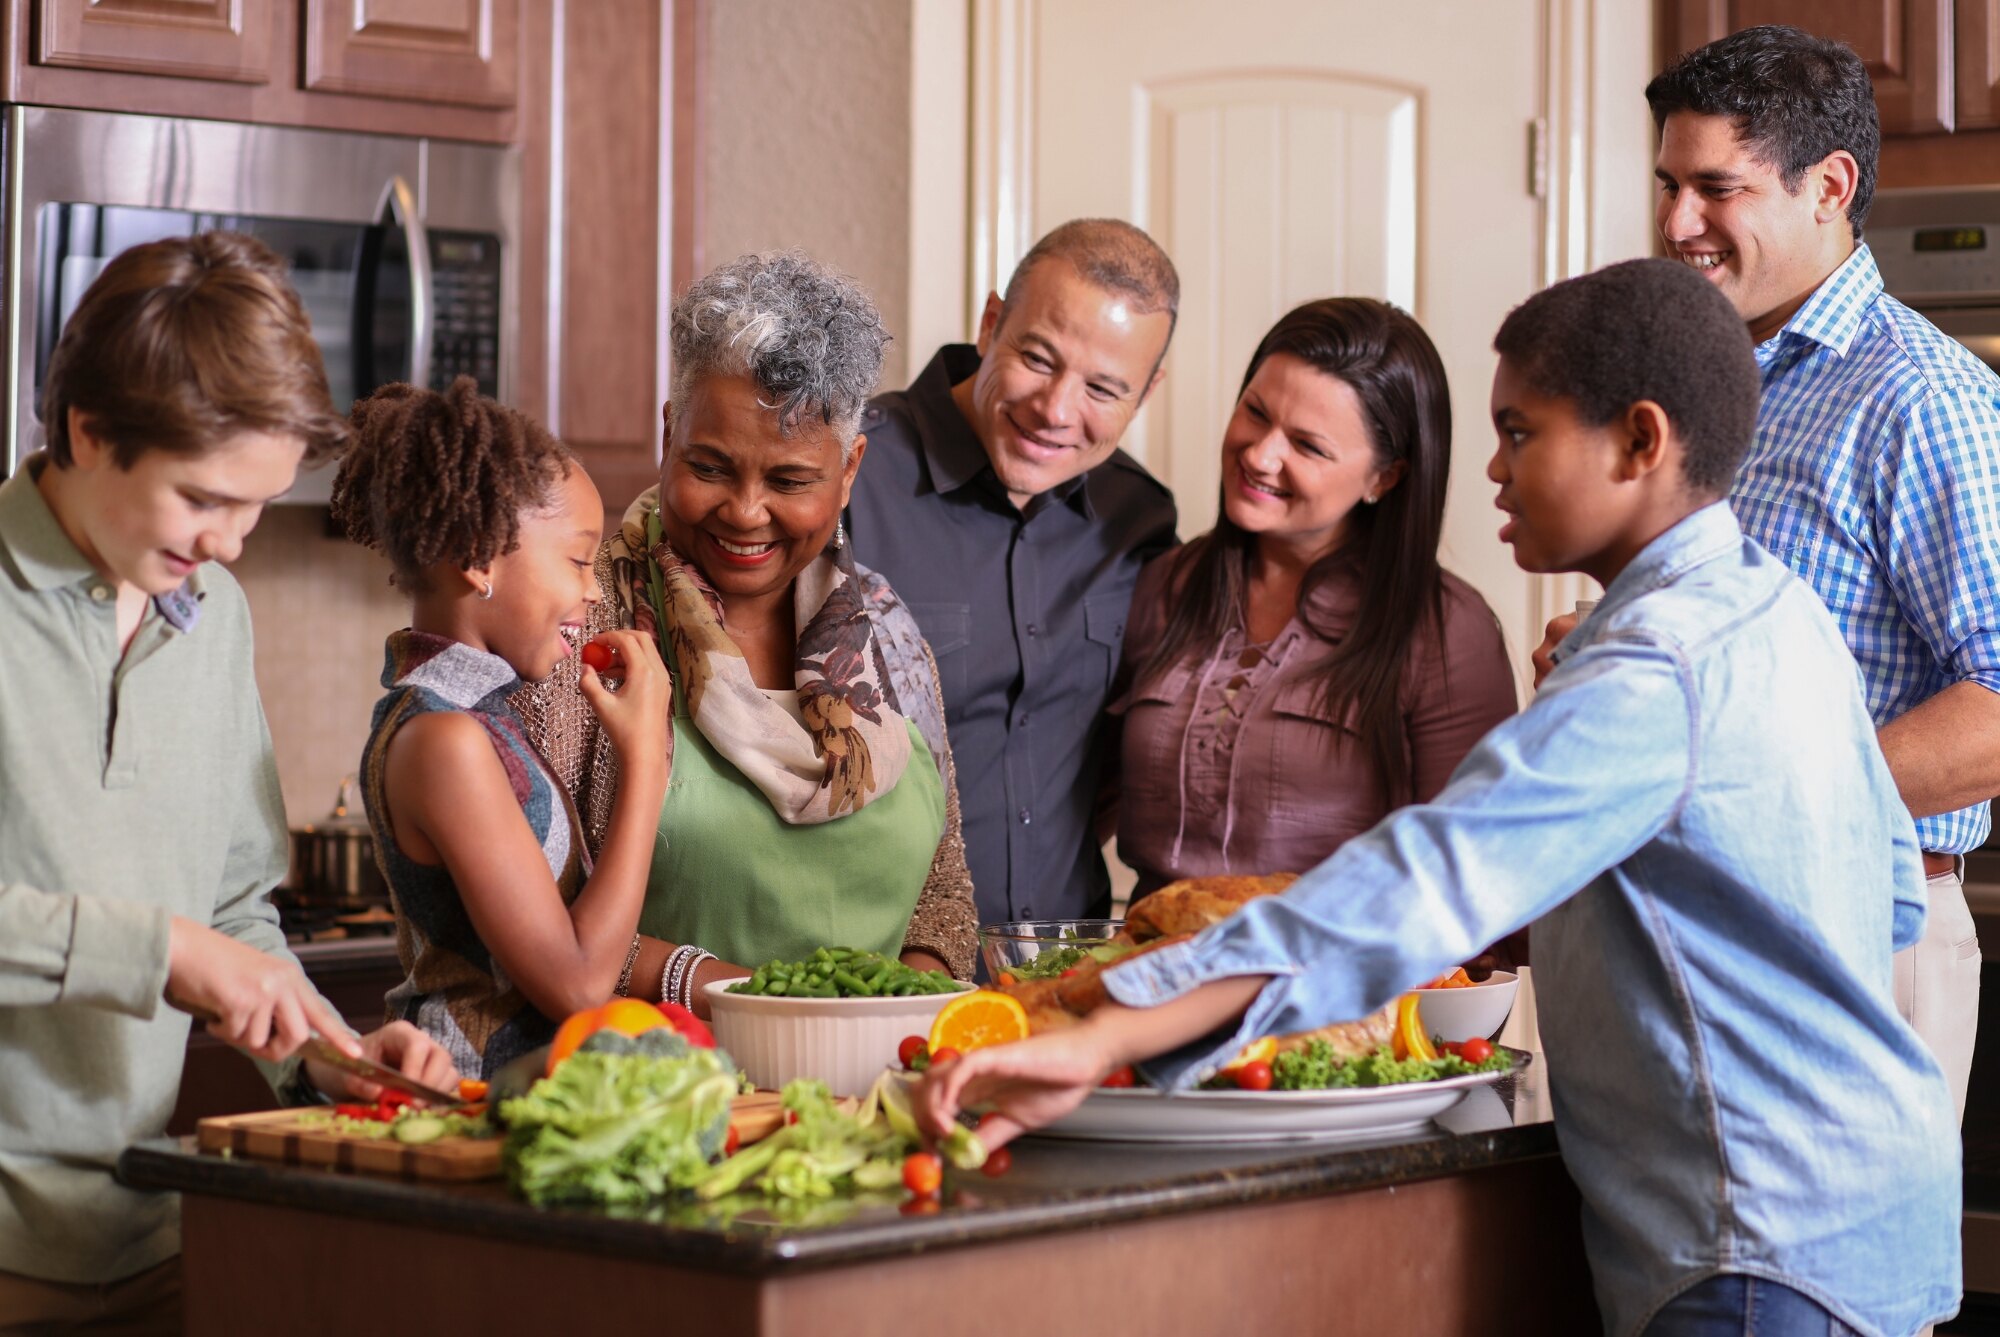 Diverse Family In Kitchen smiling as a young child bites into a fruit.